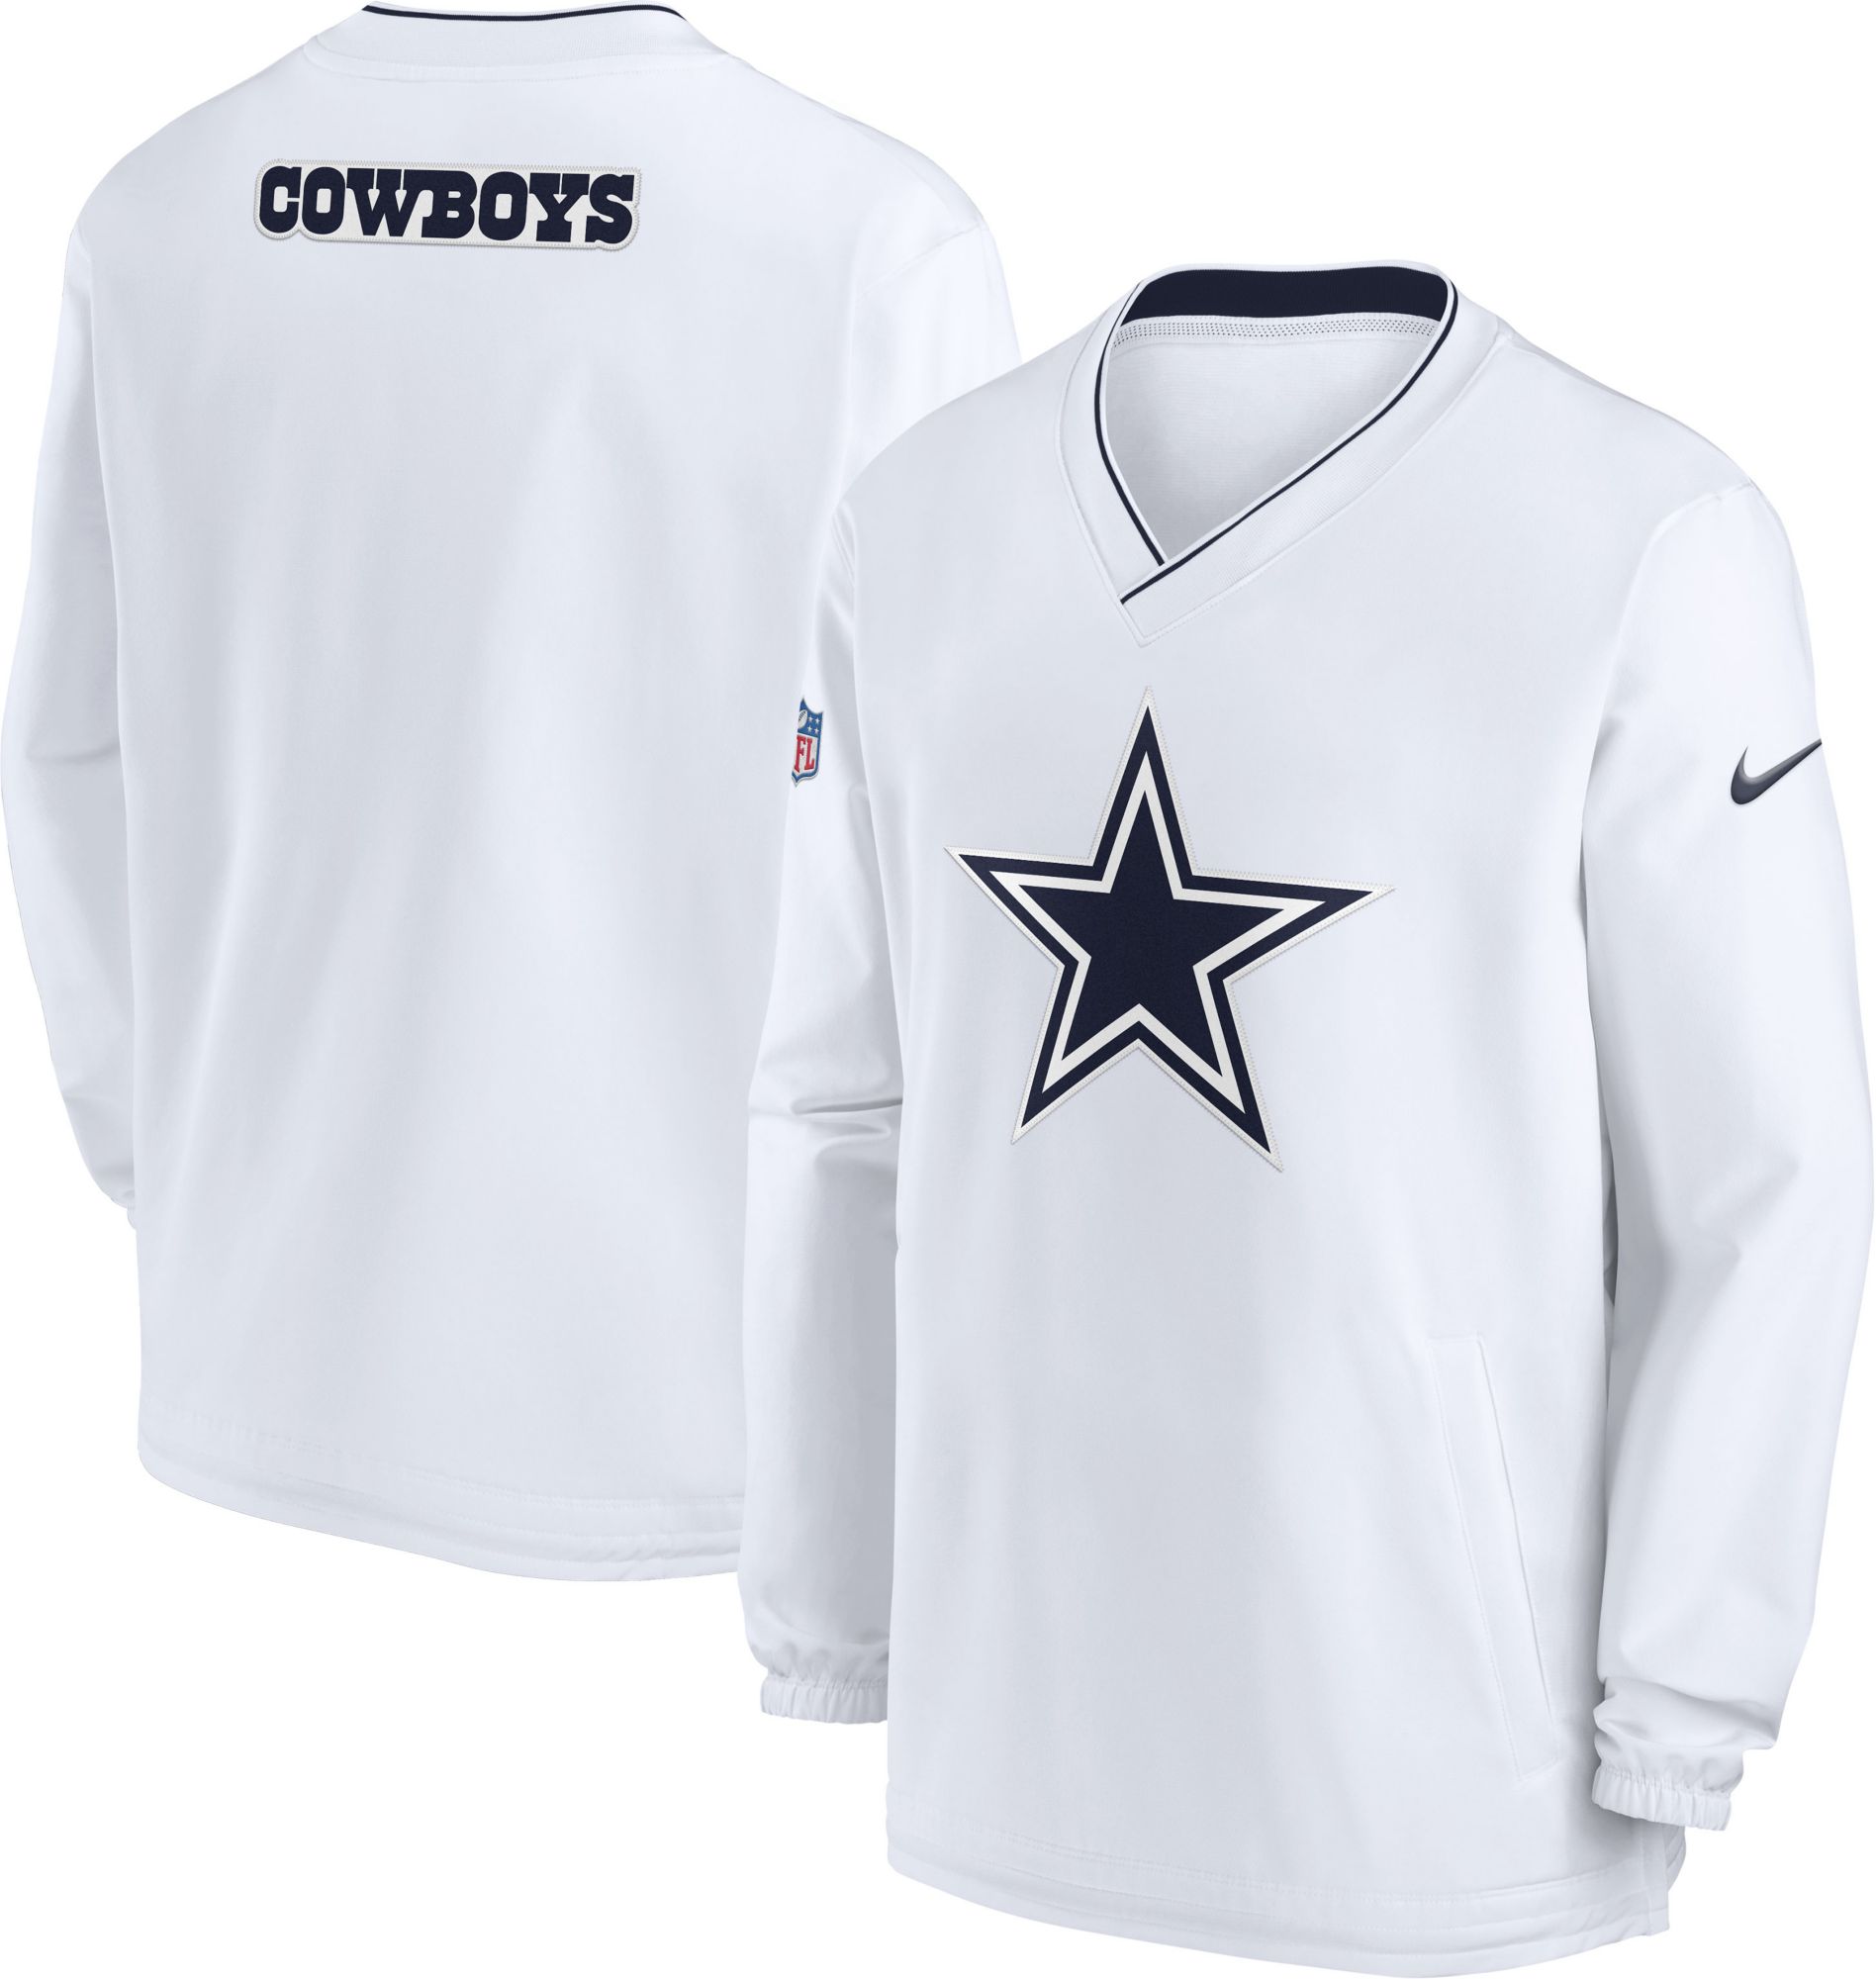 Dallas Cowboys sideline collection jersey